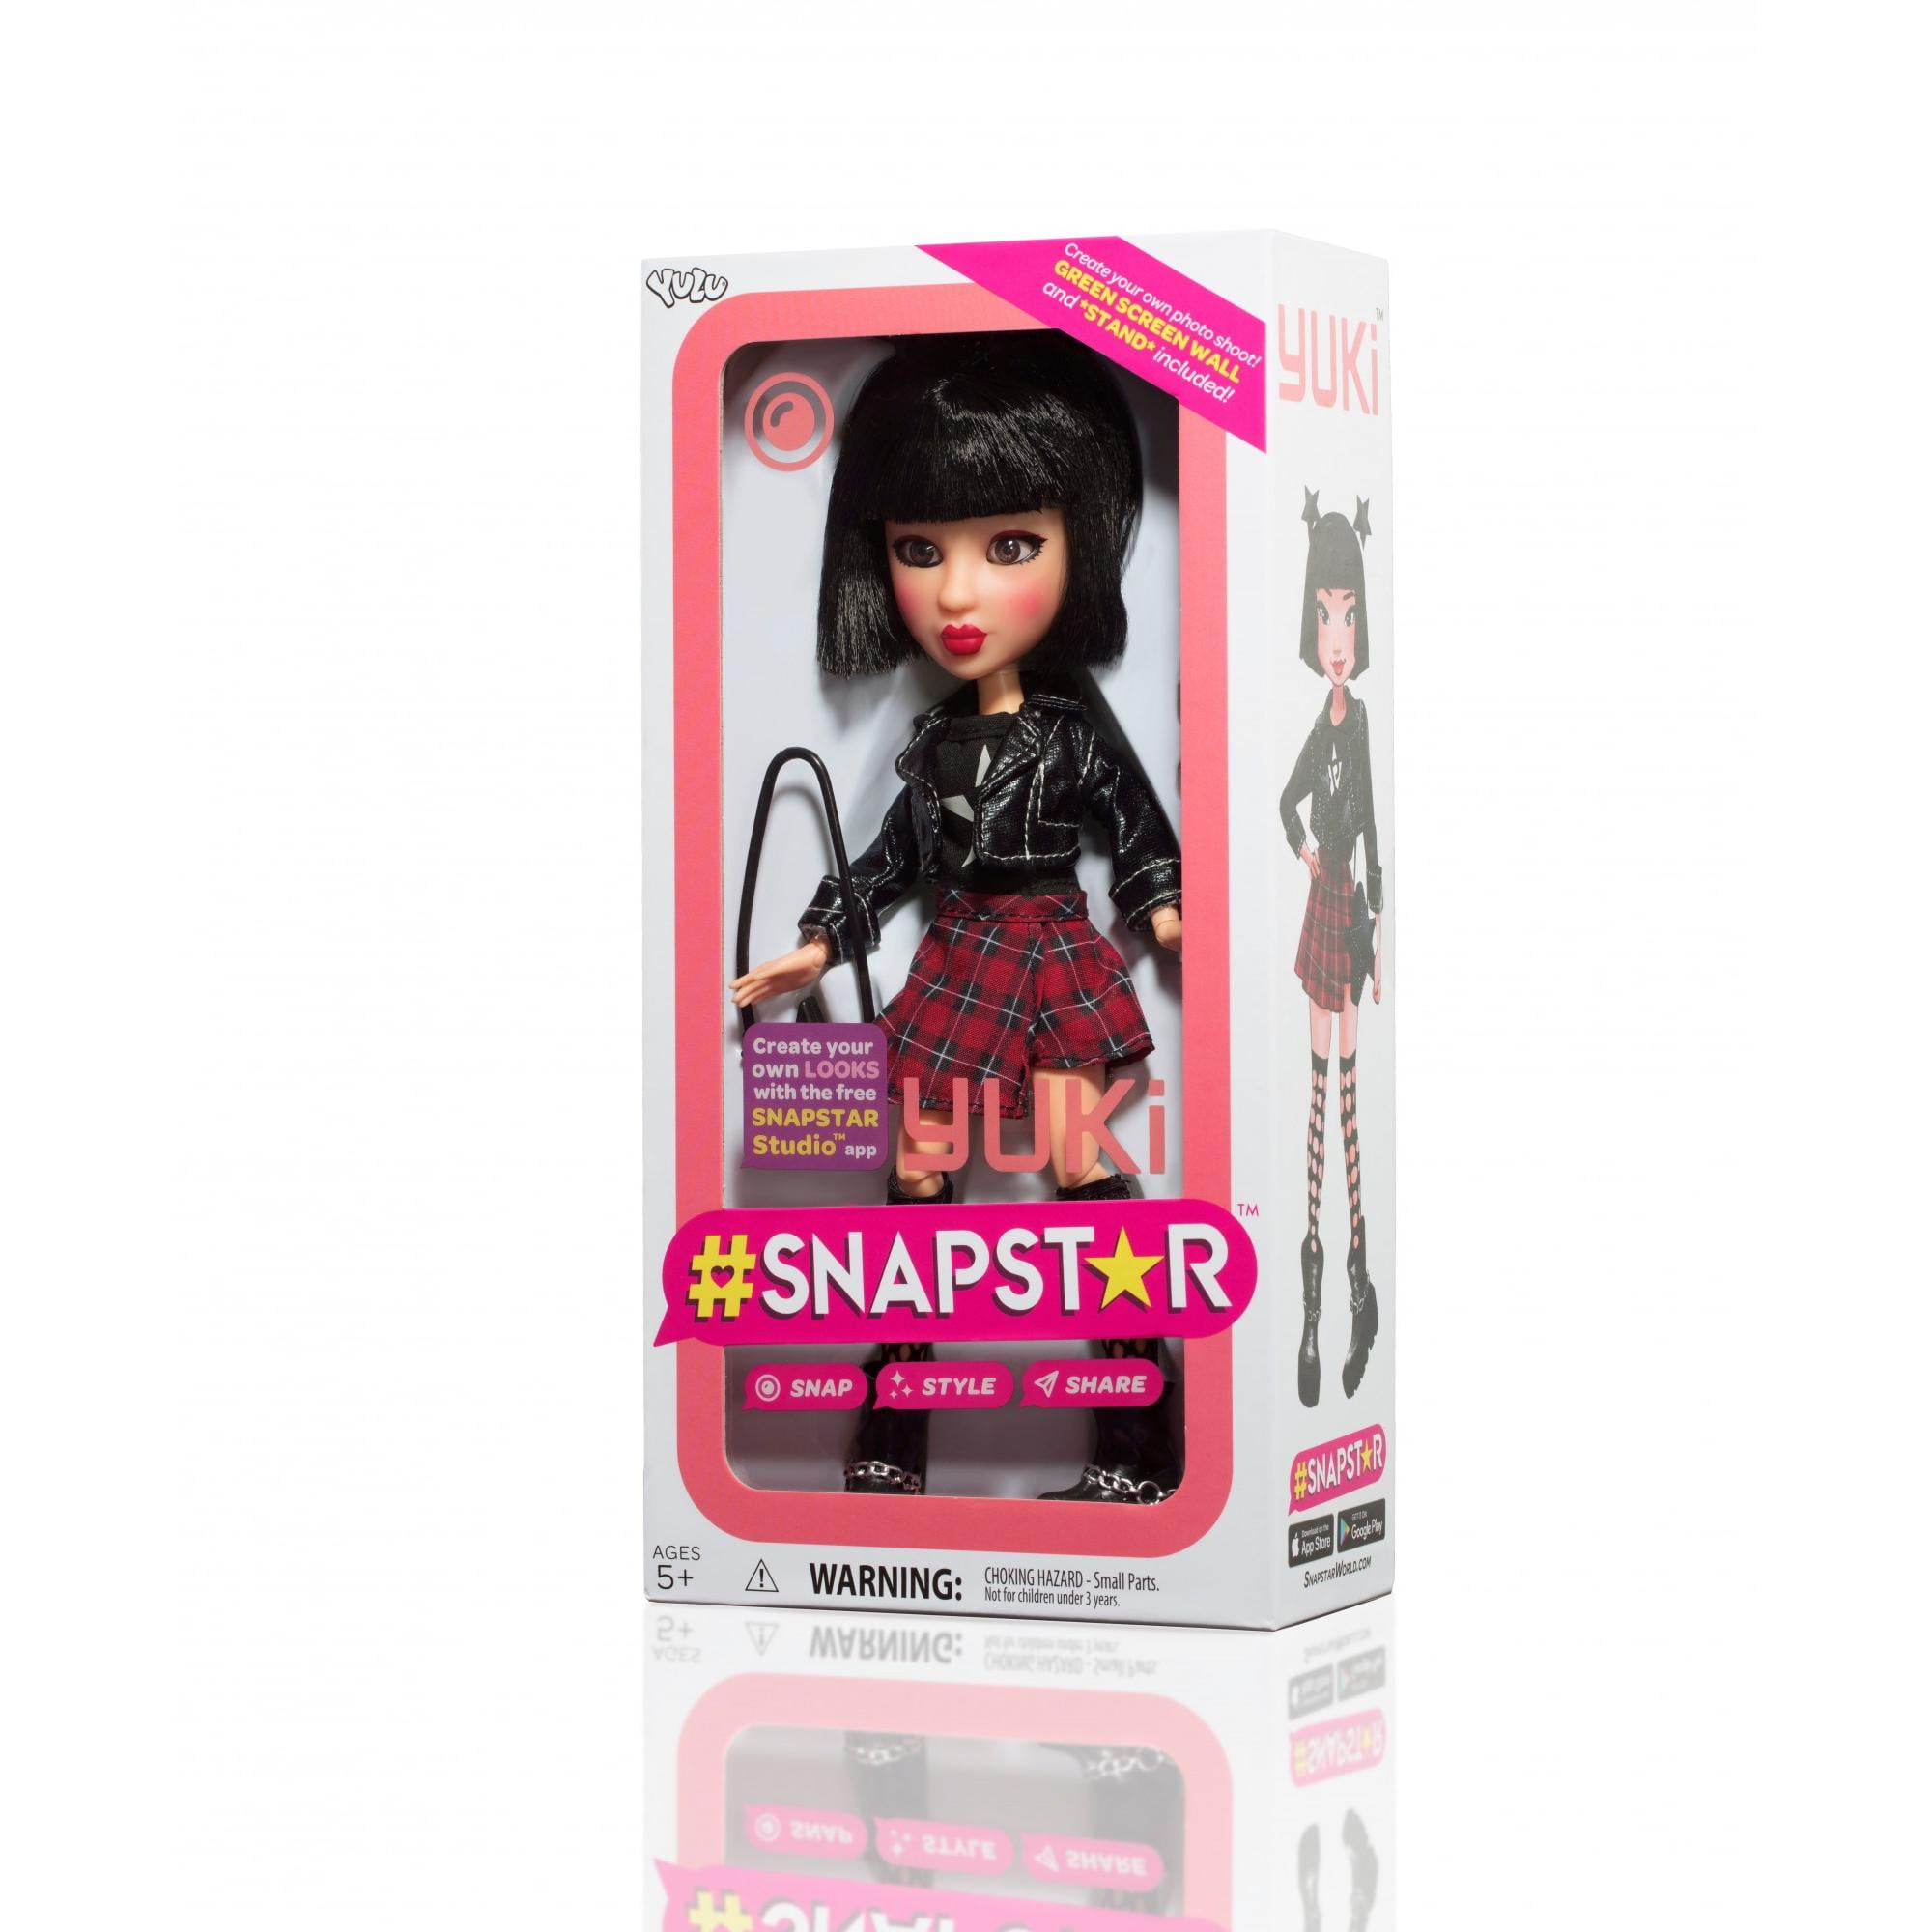 Snapstar Yuki Doll Snap Style Share Ages 5 for sale online 